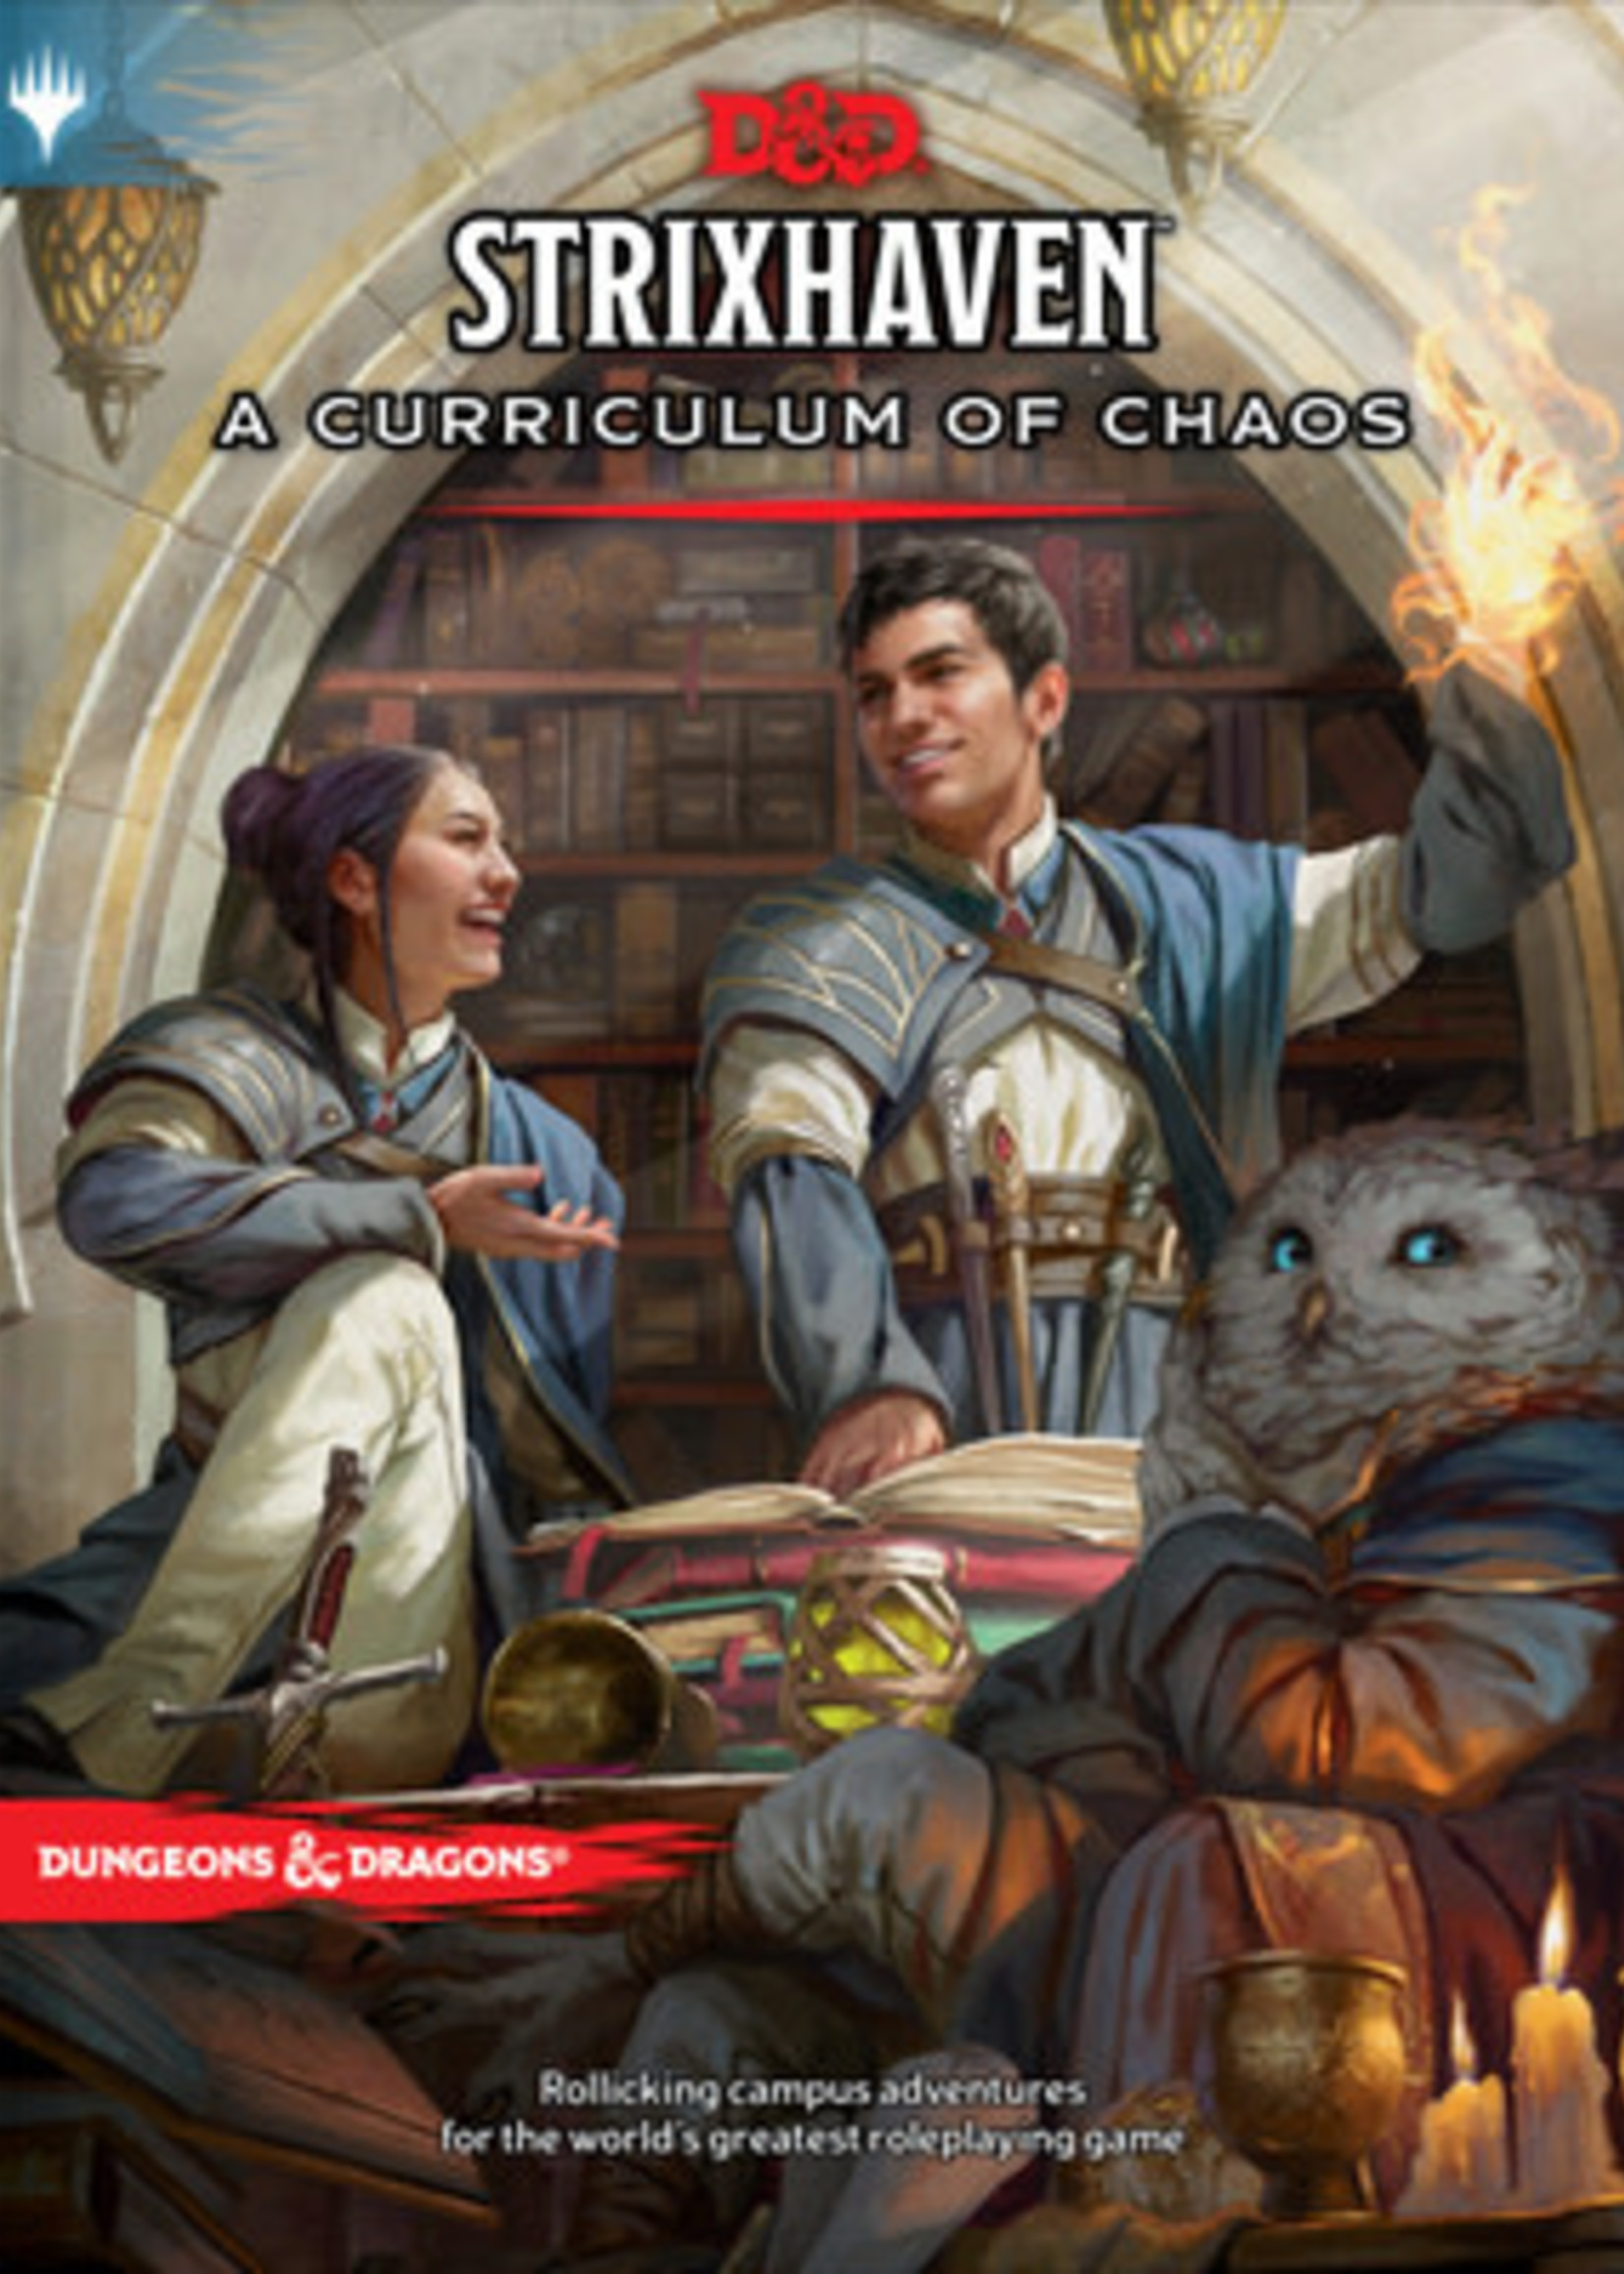 Strixhaven: Curriculum of Chaos (Dungeons & Dragons, 5th Edition) by Wizards RPG Team